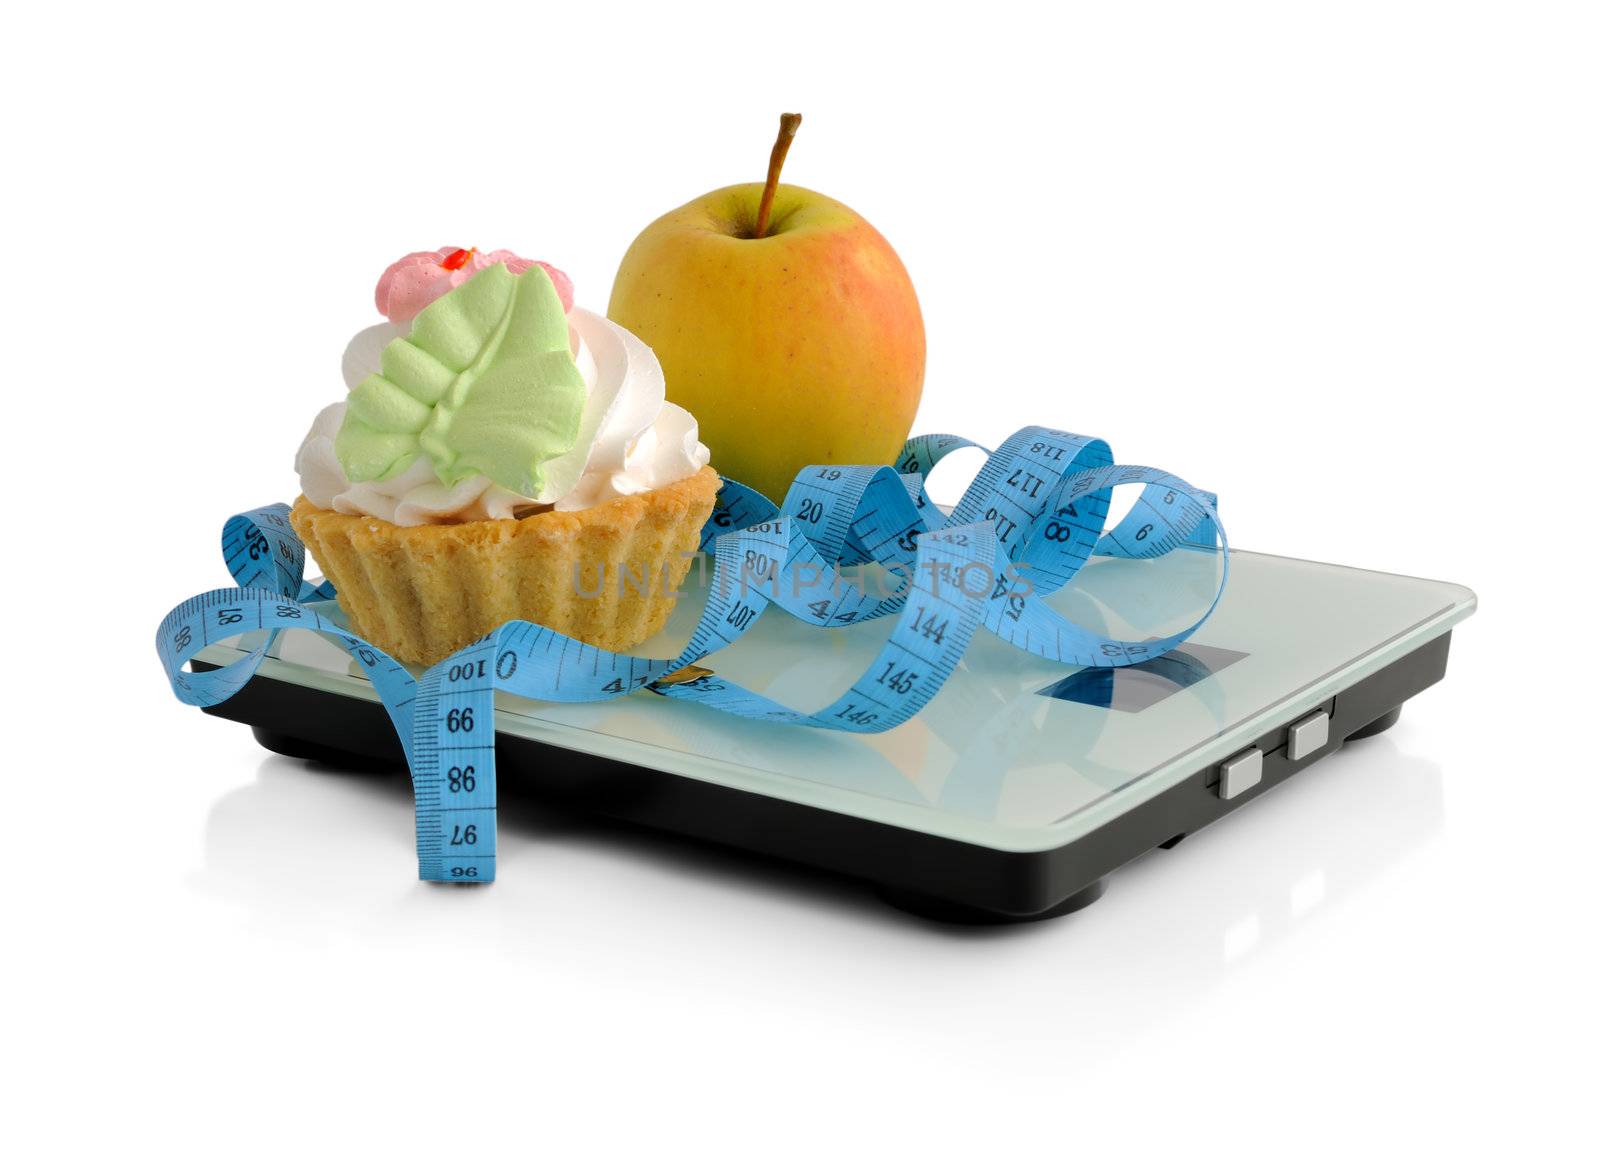 Cake and apple on scales measuring tape wrapped by Apolonia